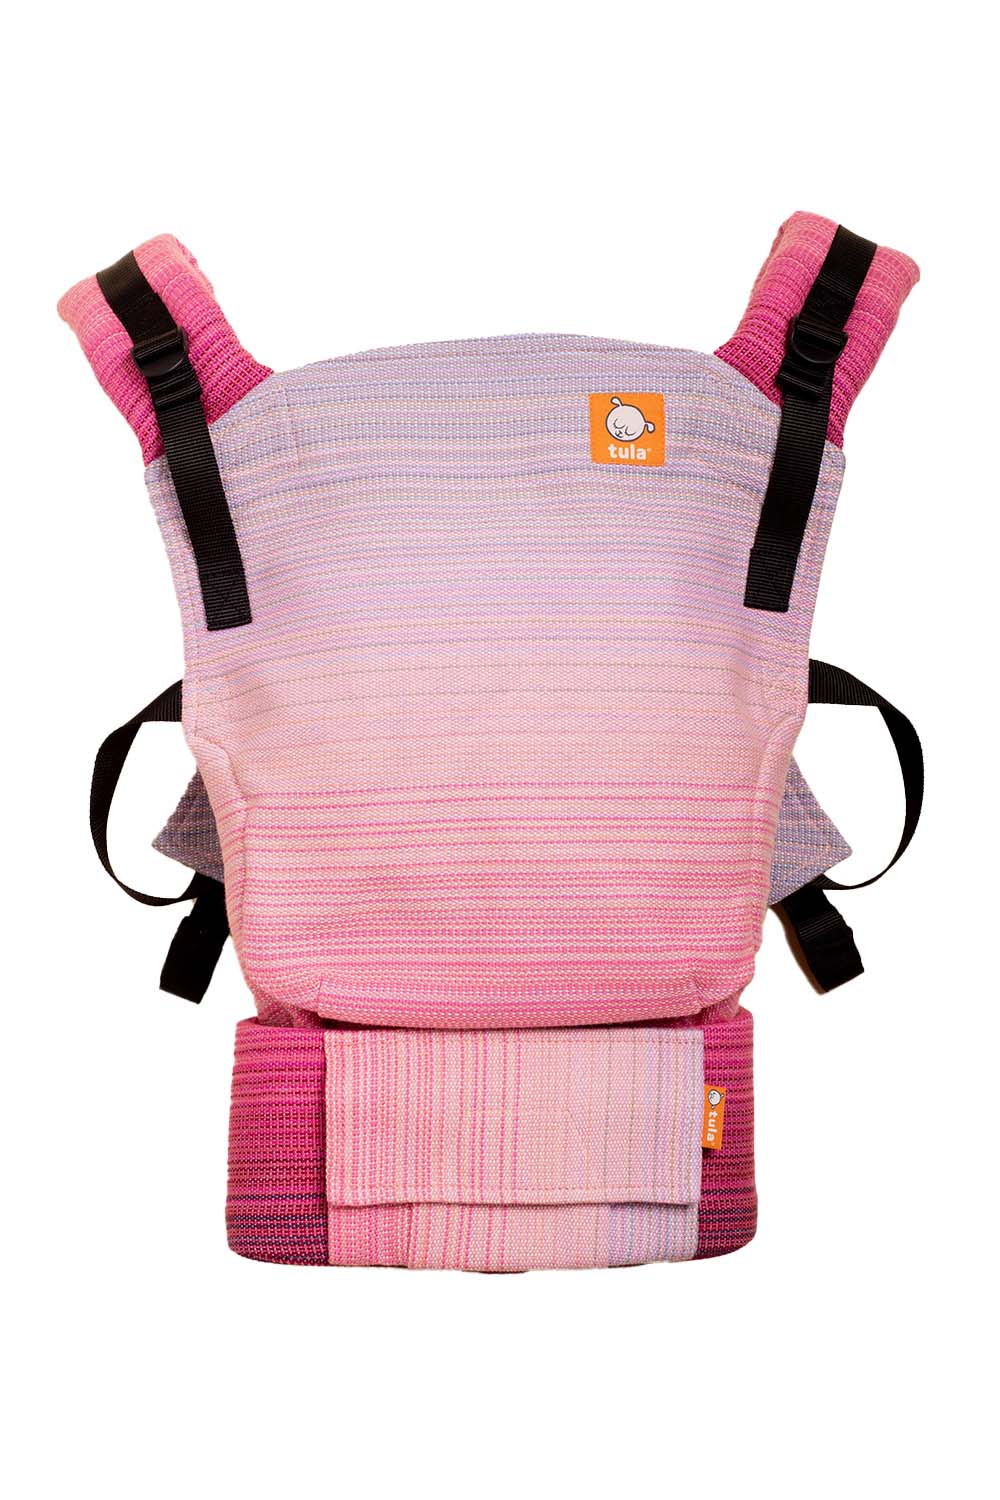 Something Very Small and Very Sweet - Signature Handwoven Free-to-Grow Baby Carrier